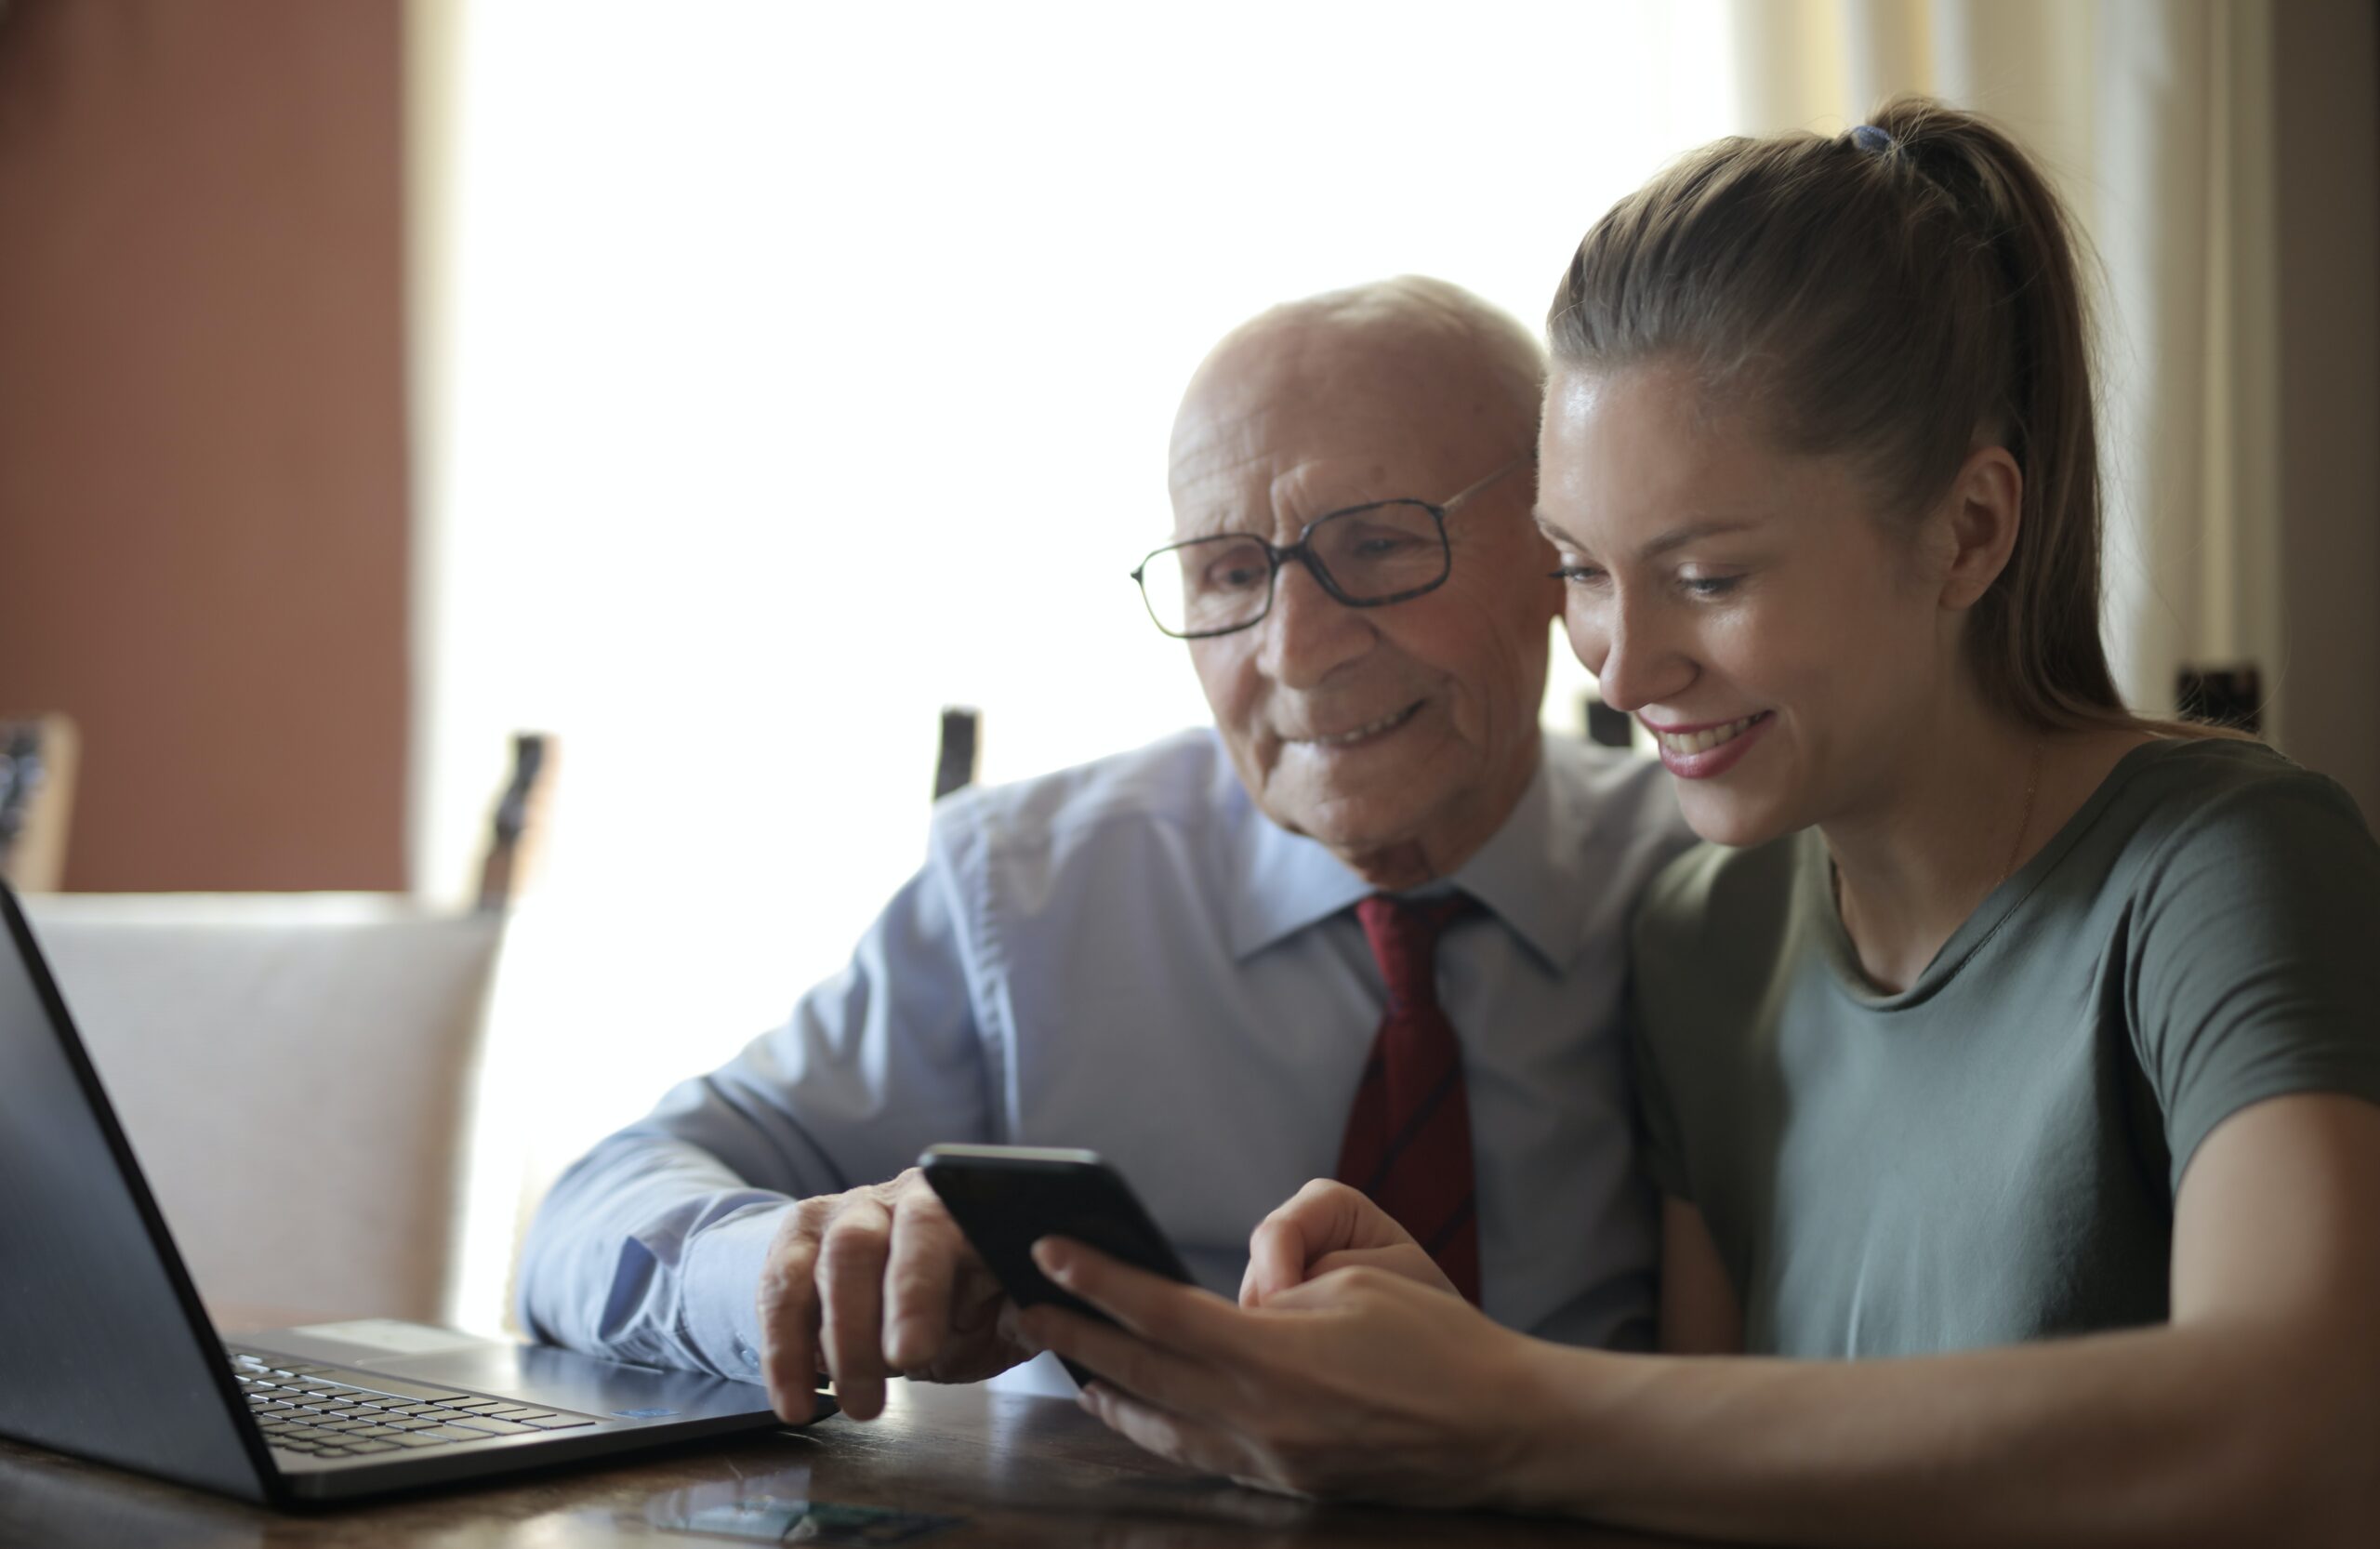 An older man and a young woman look at a smart phone together and smile